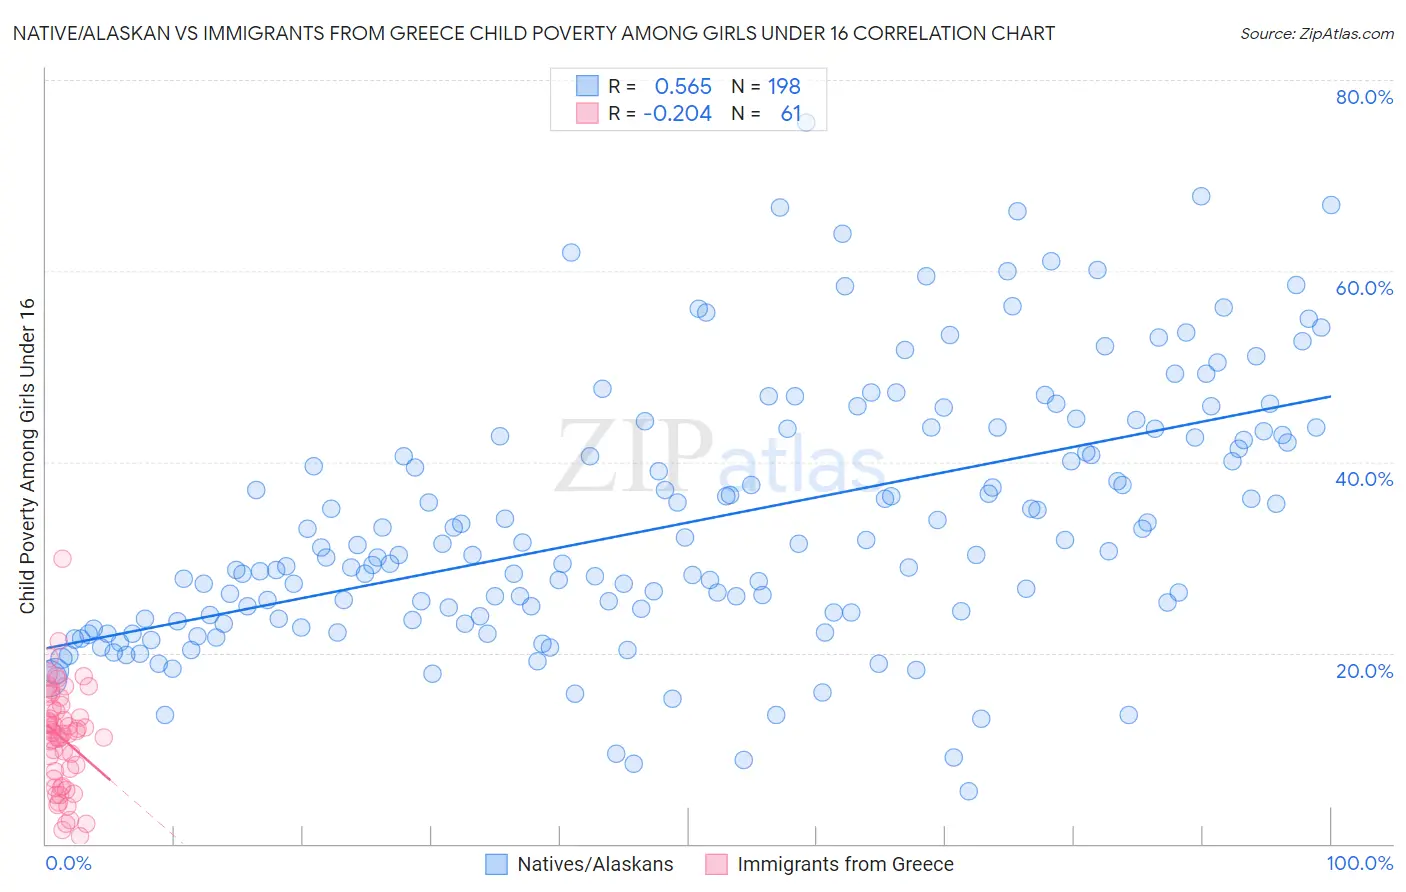 Native/Alaskan vs Immigrants from Greece Child Poverty Among Girls Under 16